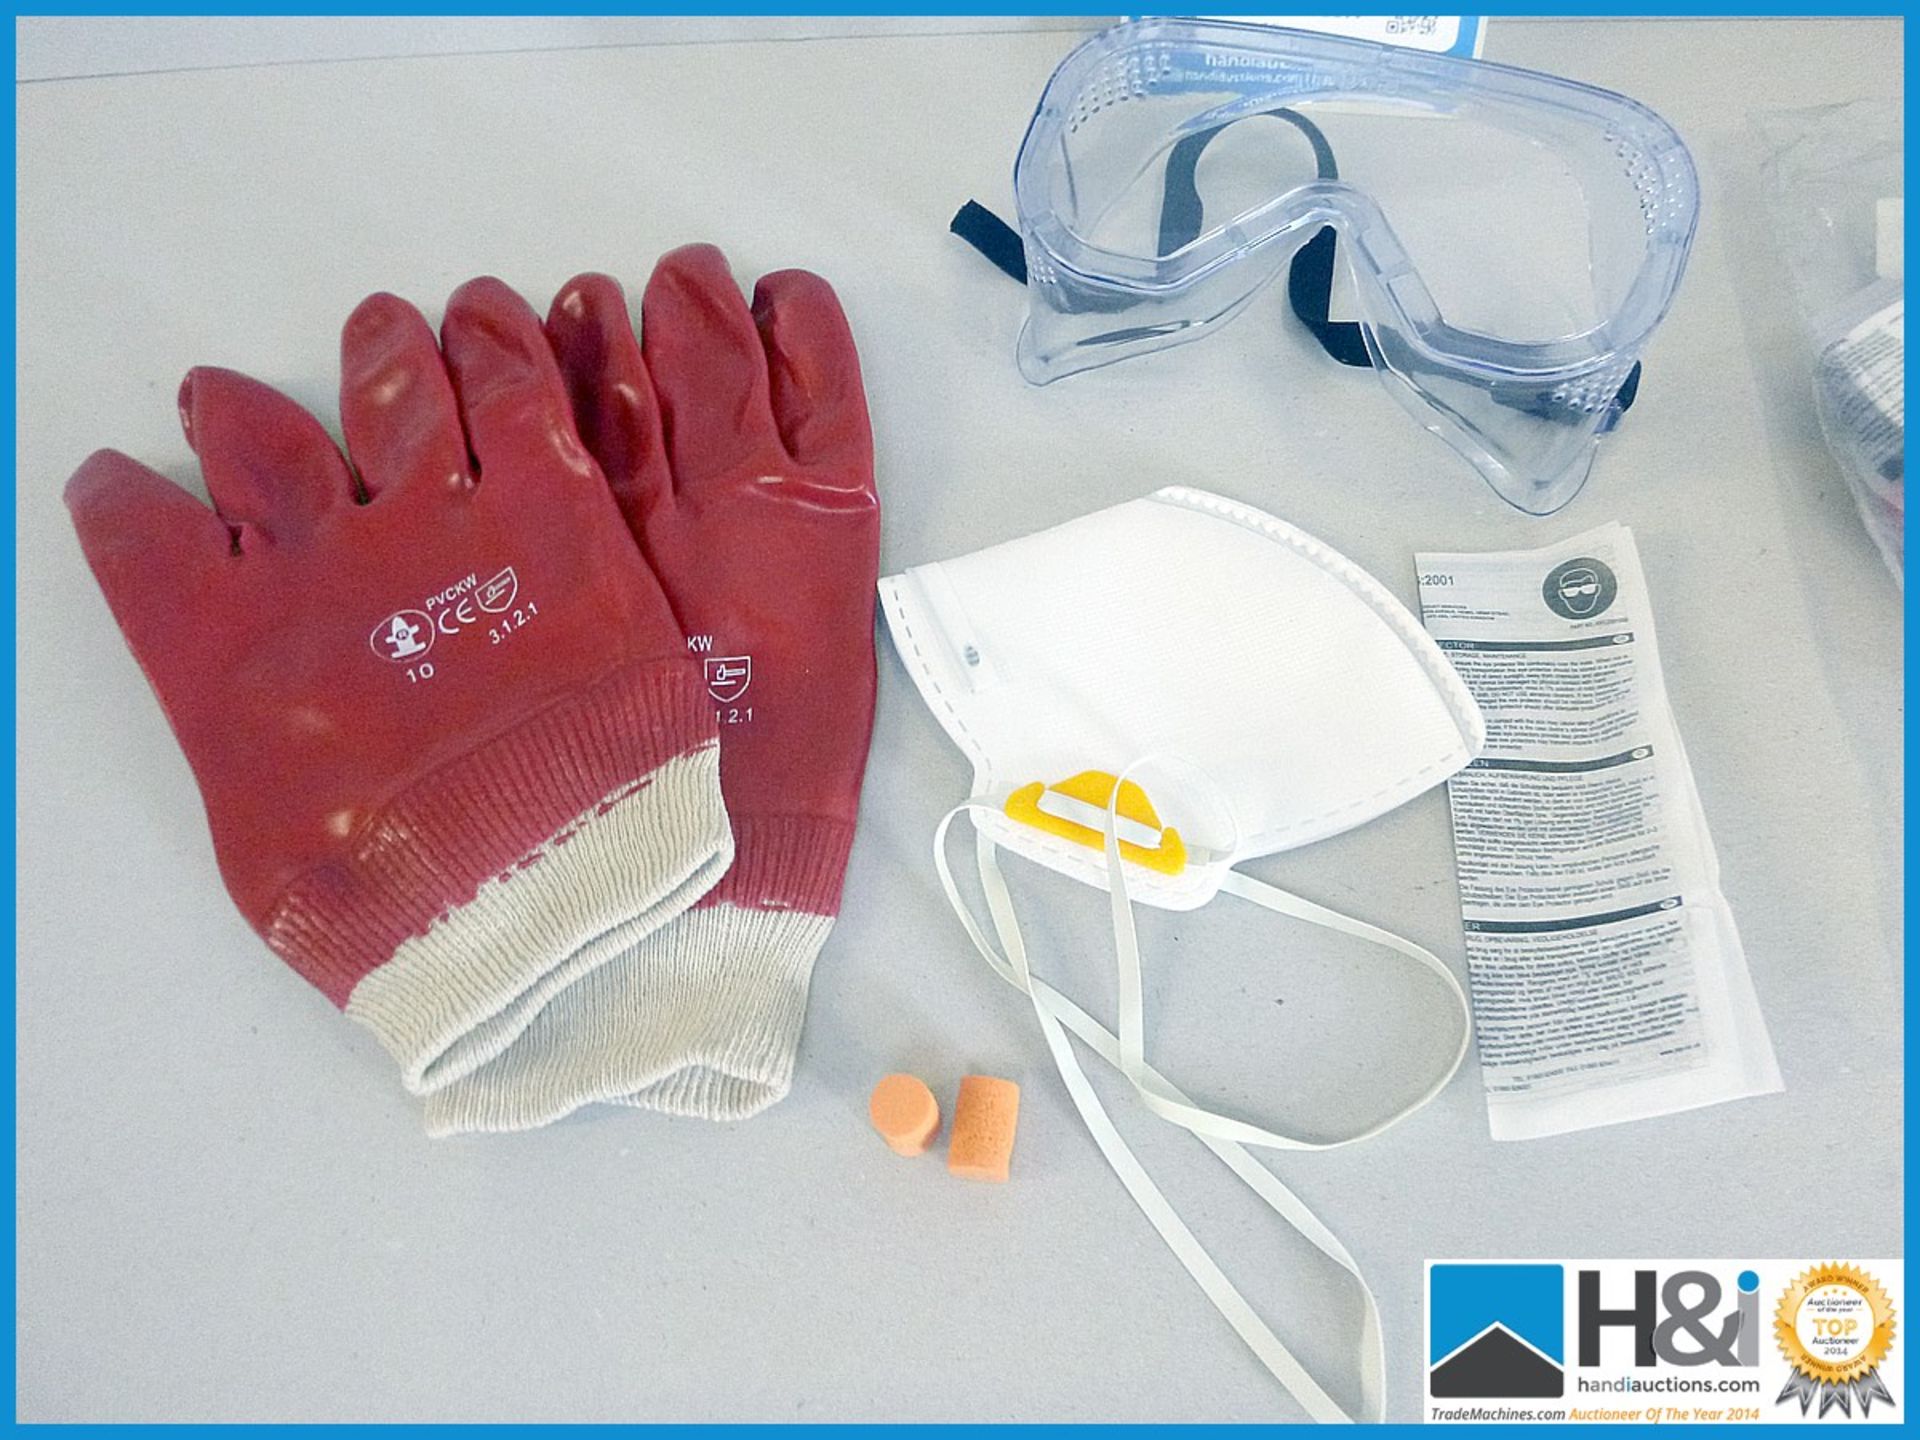 Safety set of ppe equipment including gloves goggles ear plugs X 16 lot value of £250 + vat. - Image 2 of 3